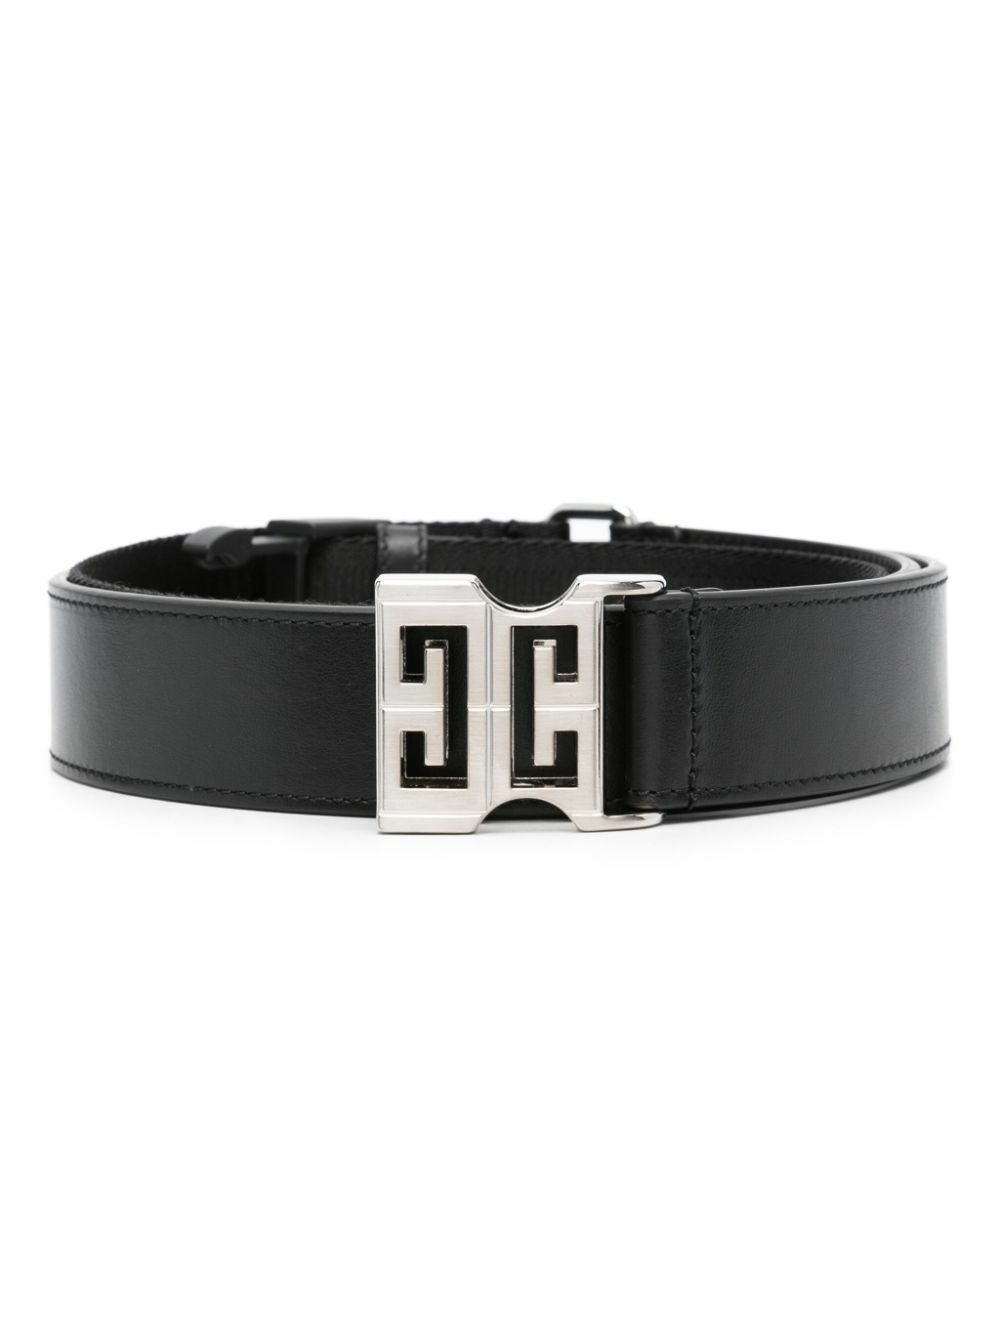 GIVENCHY - 4g Leather Belt Givenchy